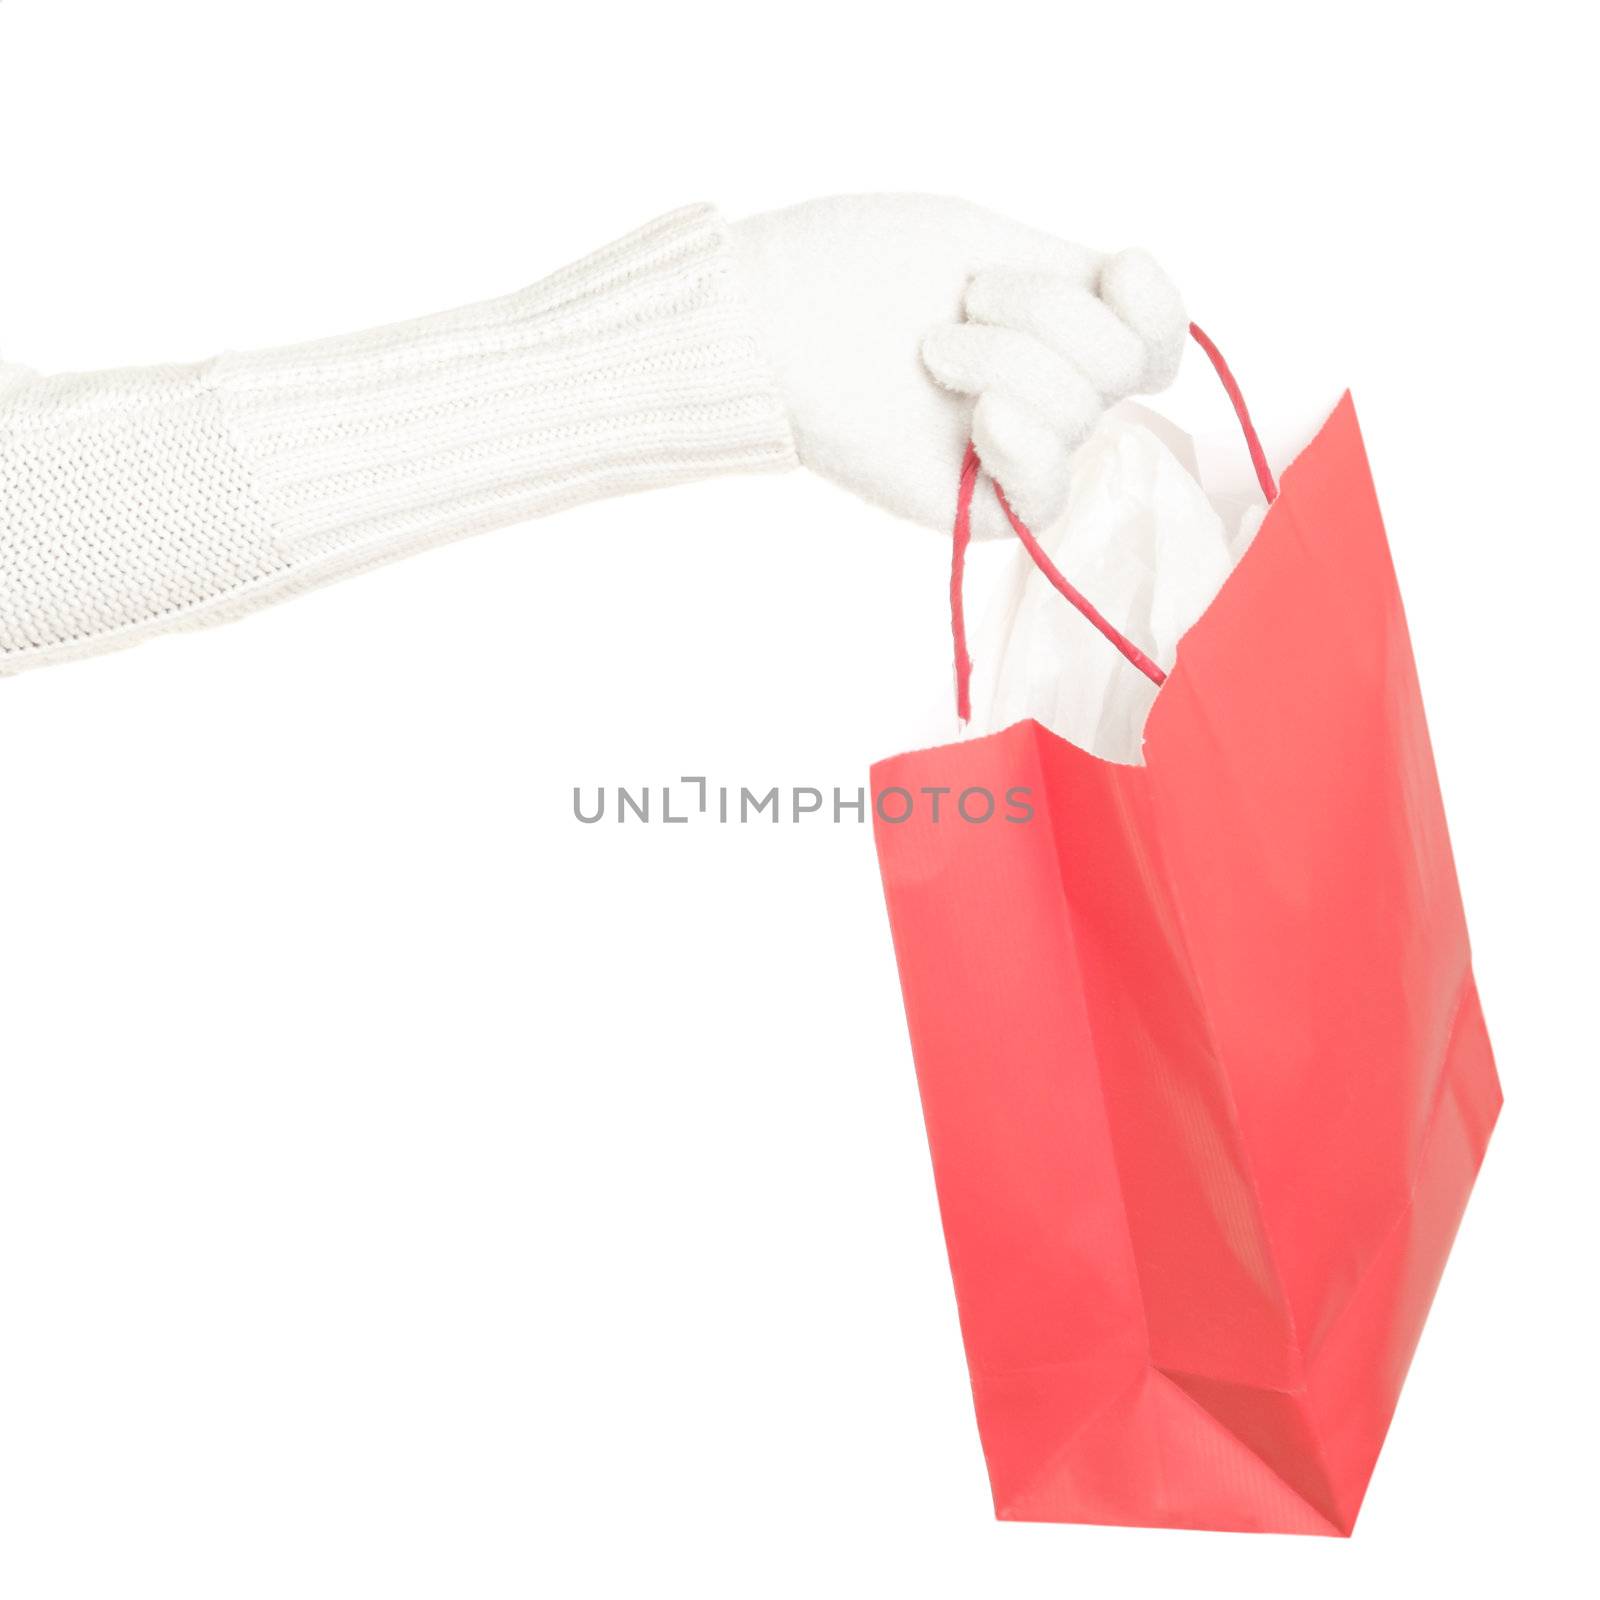 Red Christmas winter shopping bag isolated on white background.